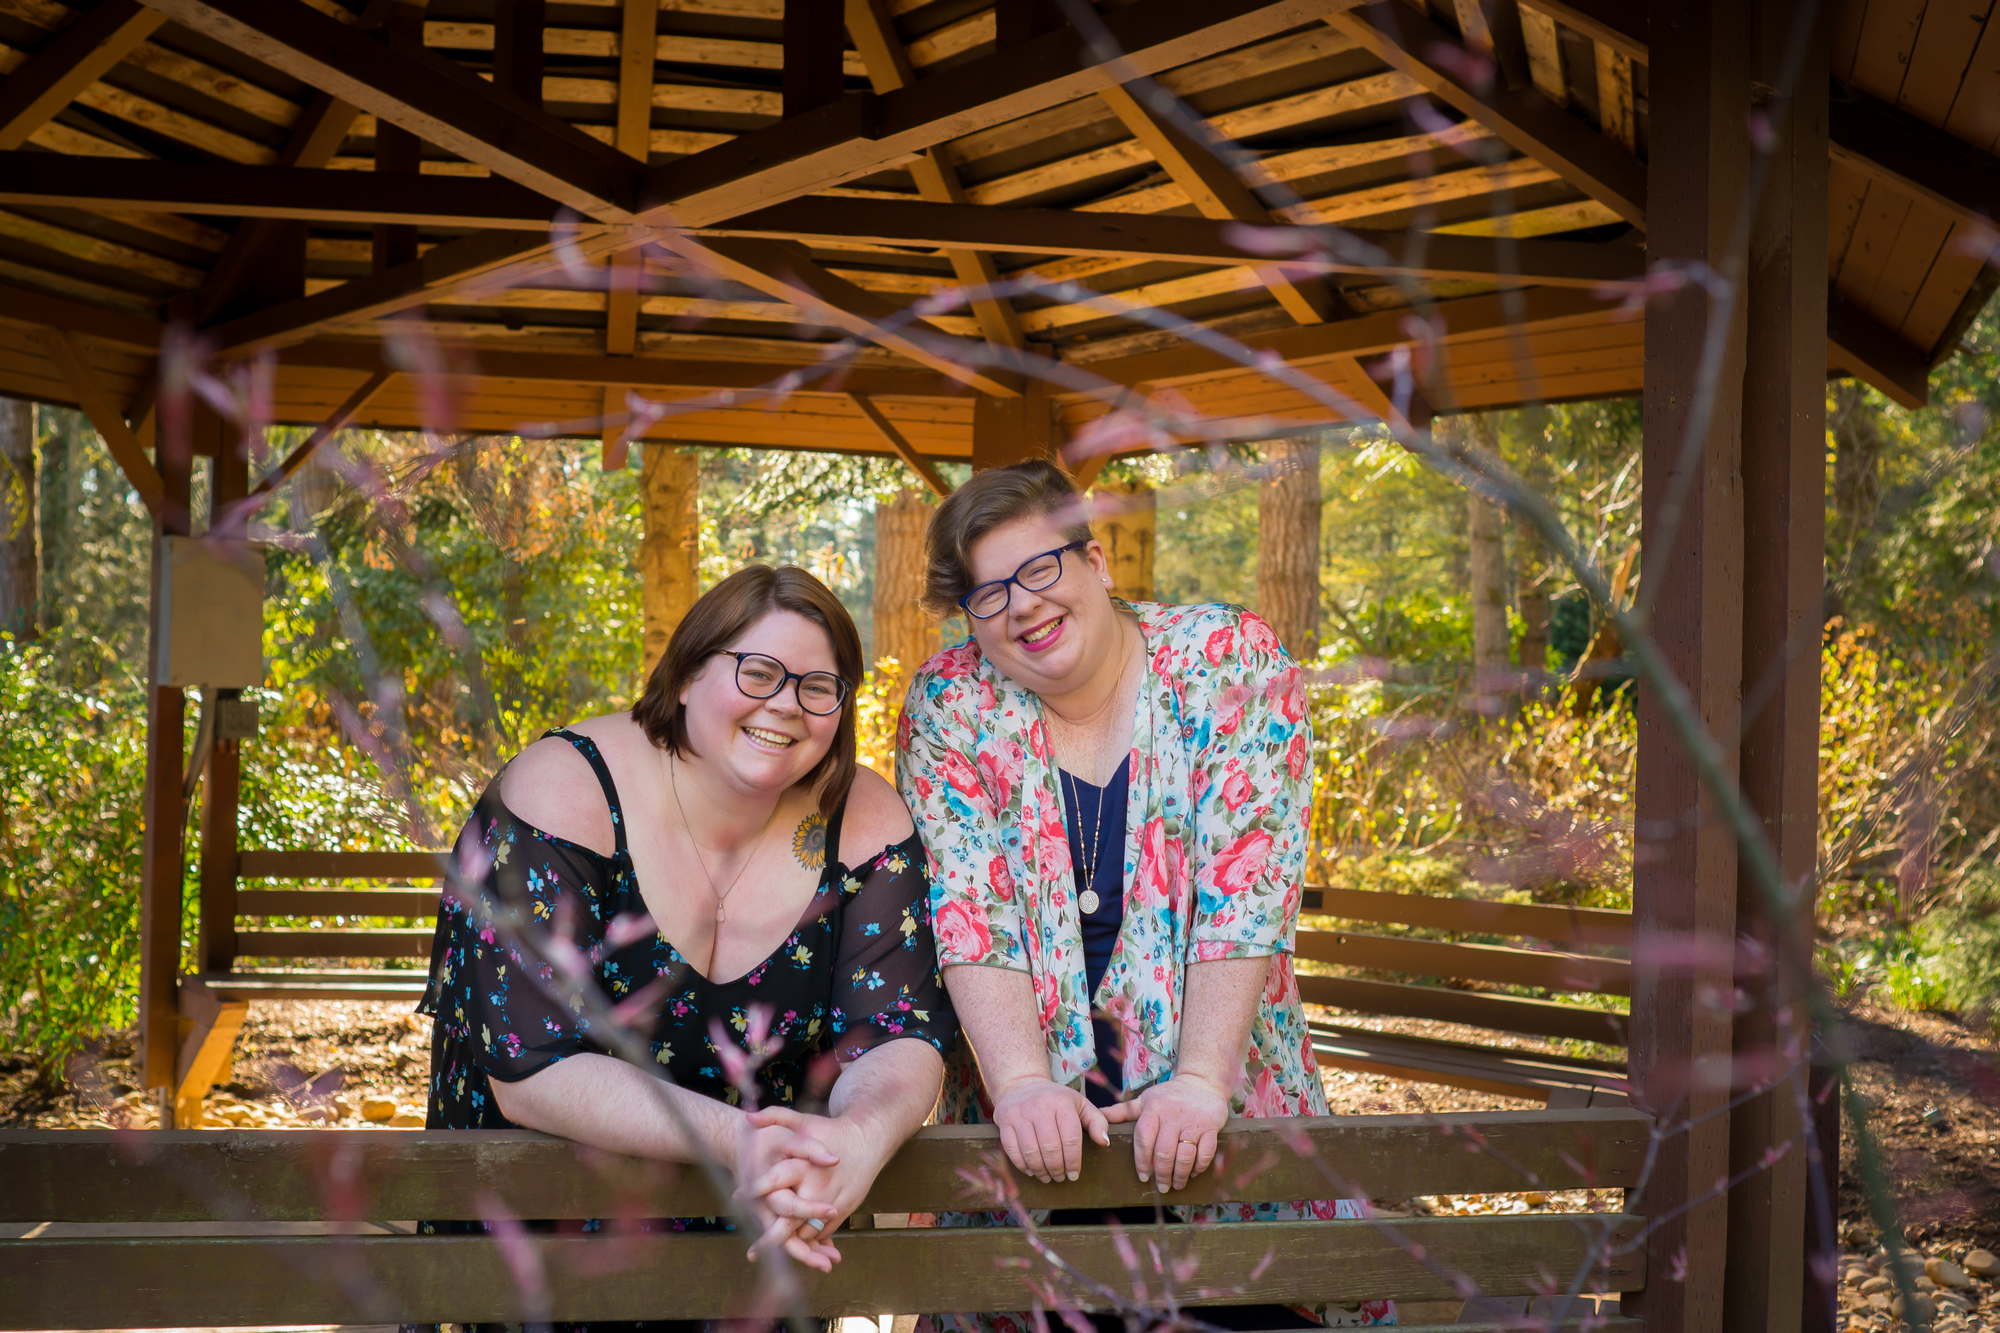   Two people pose together in a gazebo during an LGBT friendly photo shoot